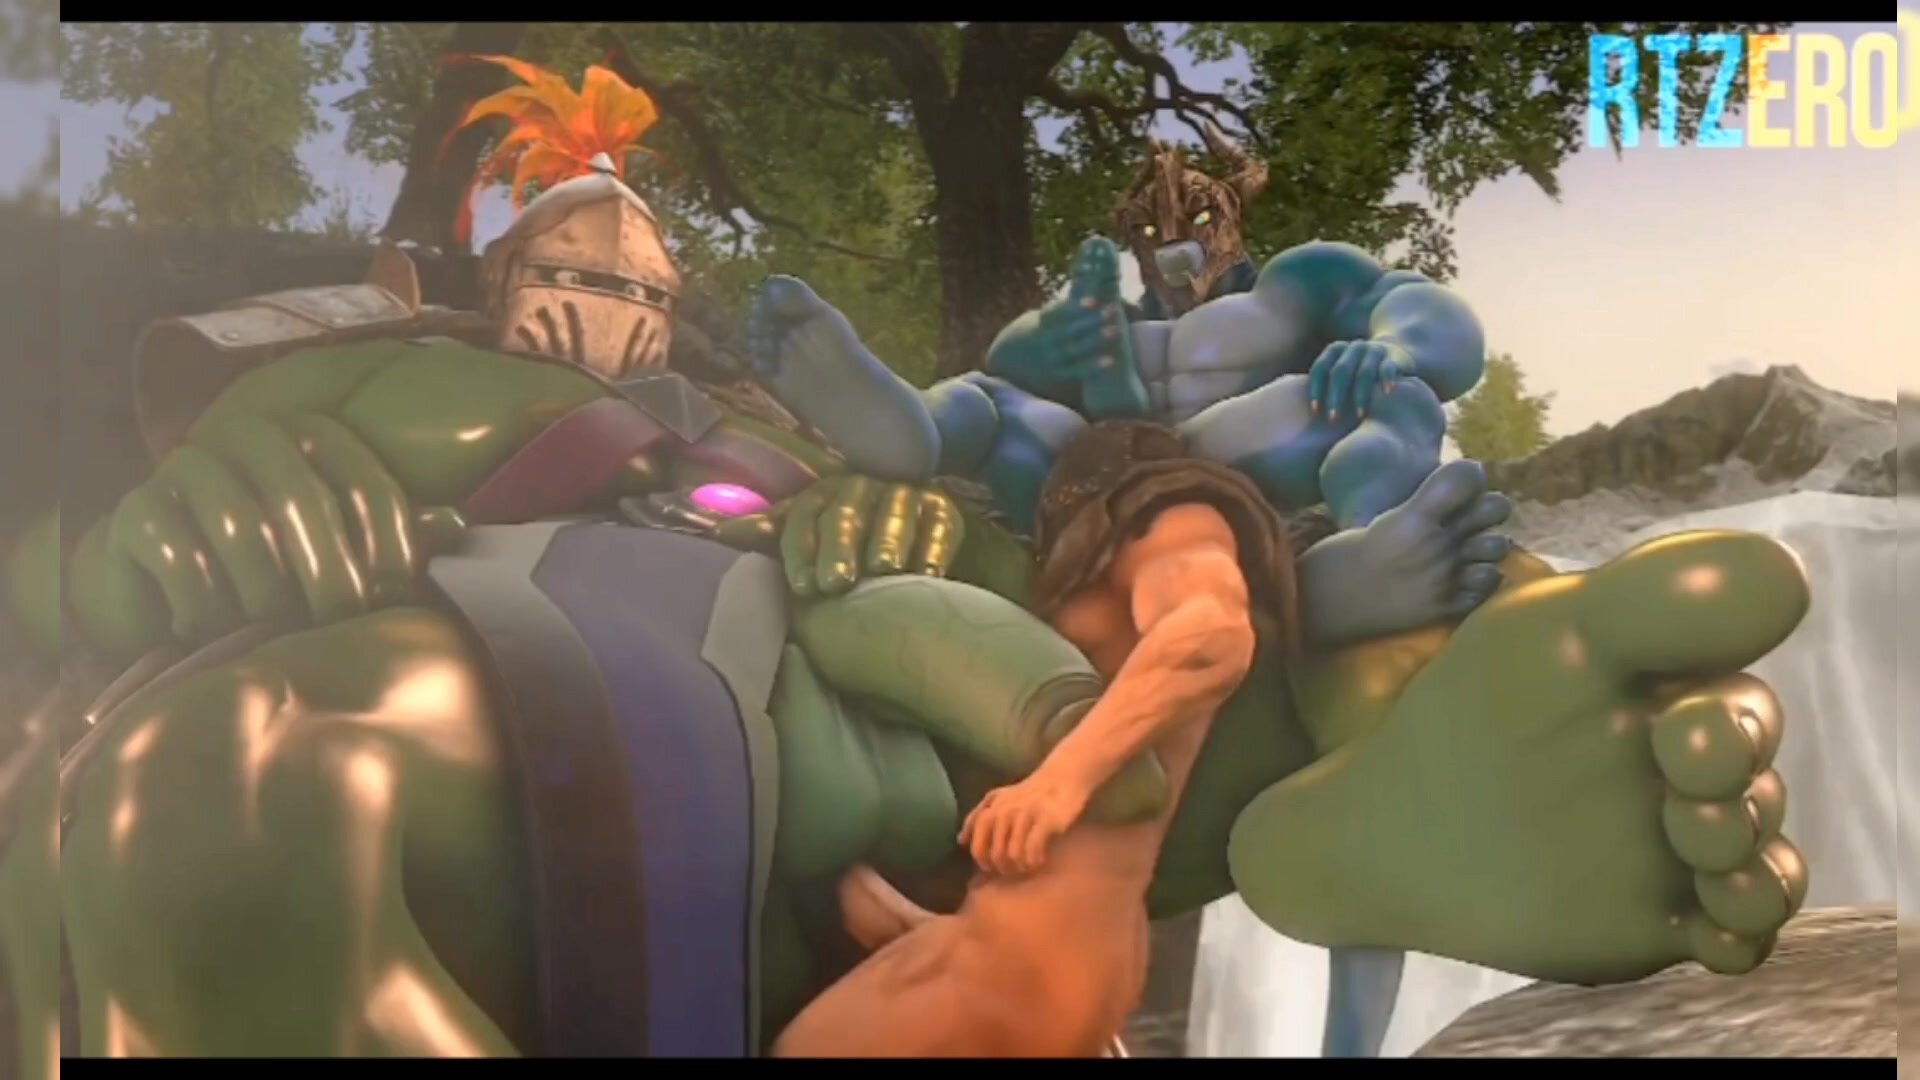 RTZERO: Green Giant Gets involved in threesome